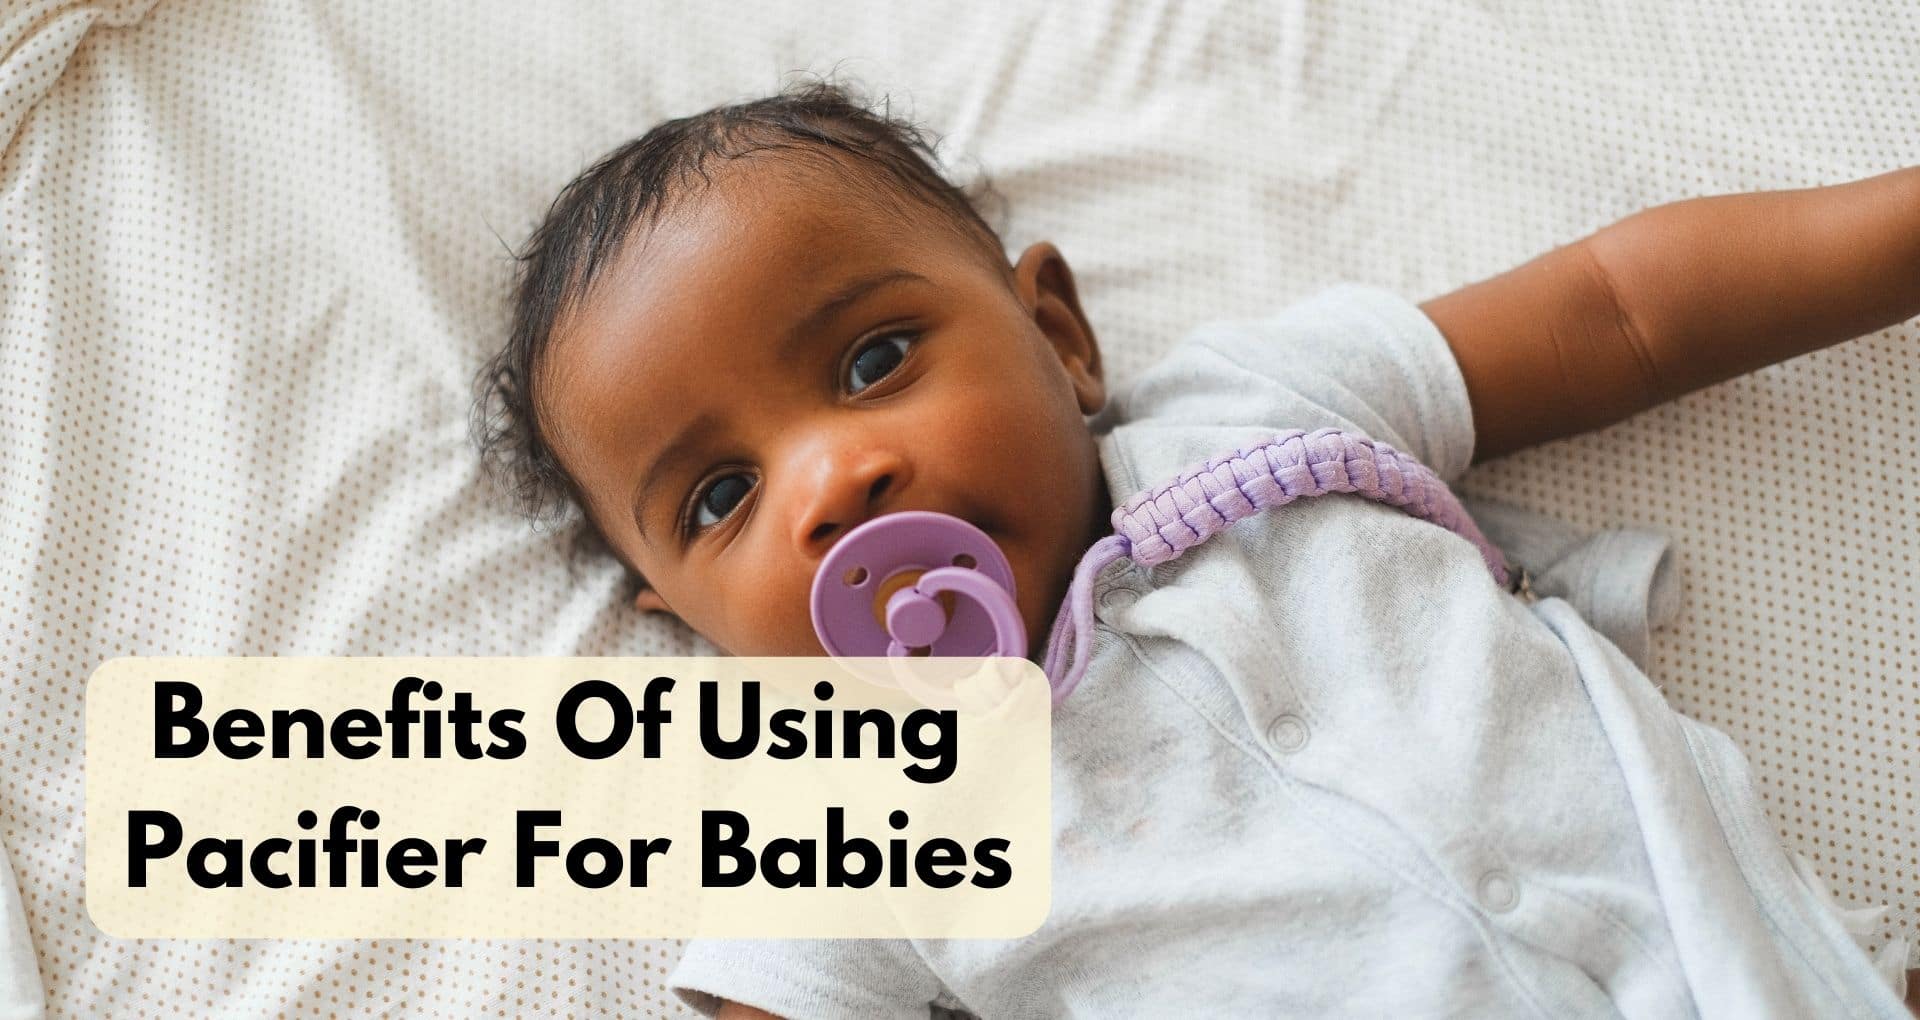 What Are The Benefits Of Using Newborn Pacifier?